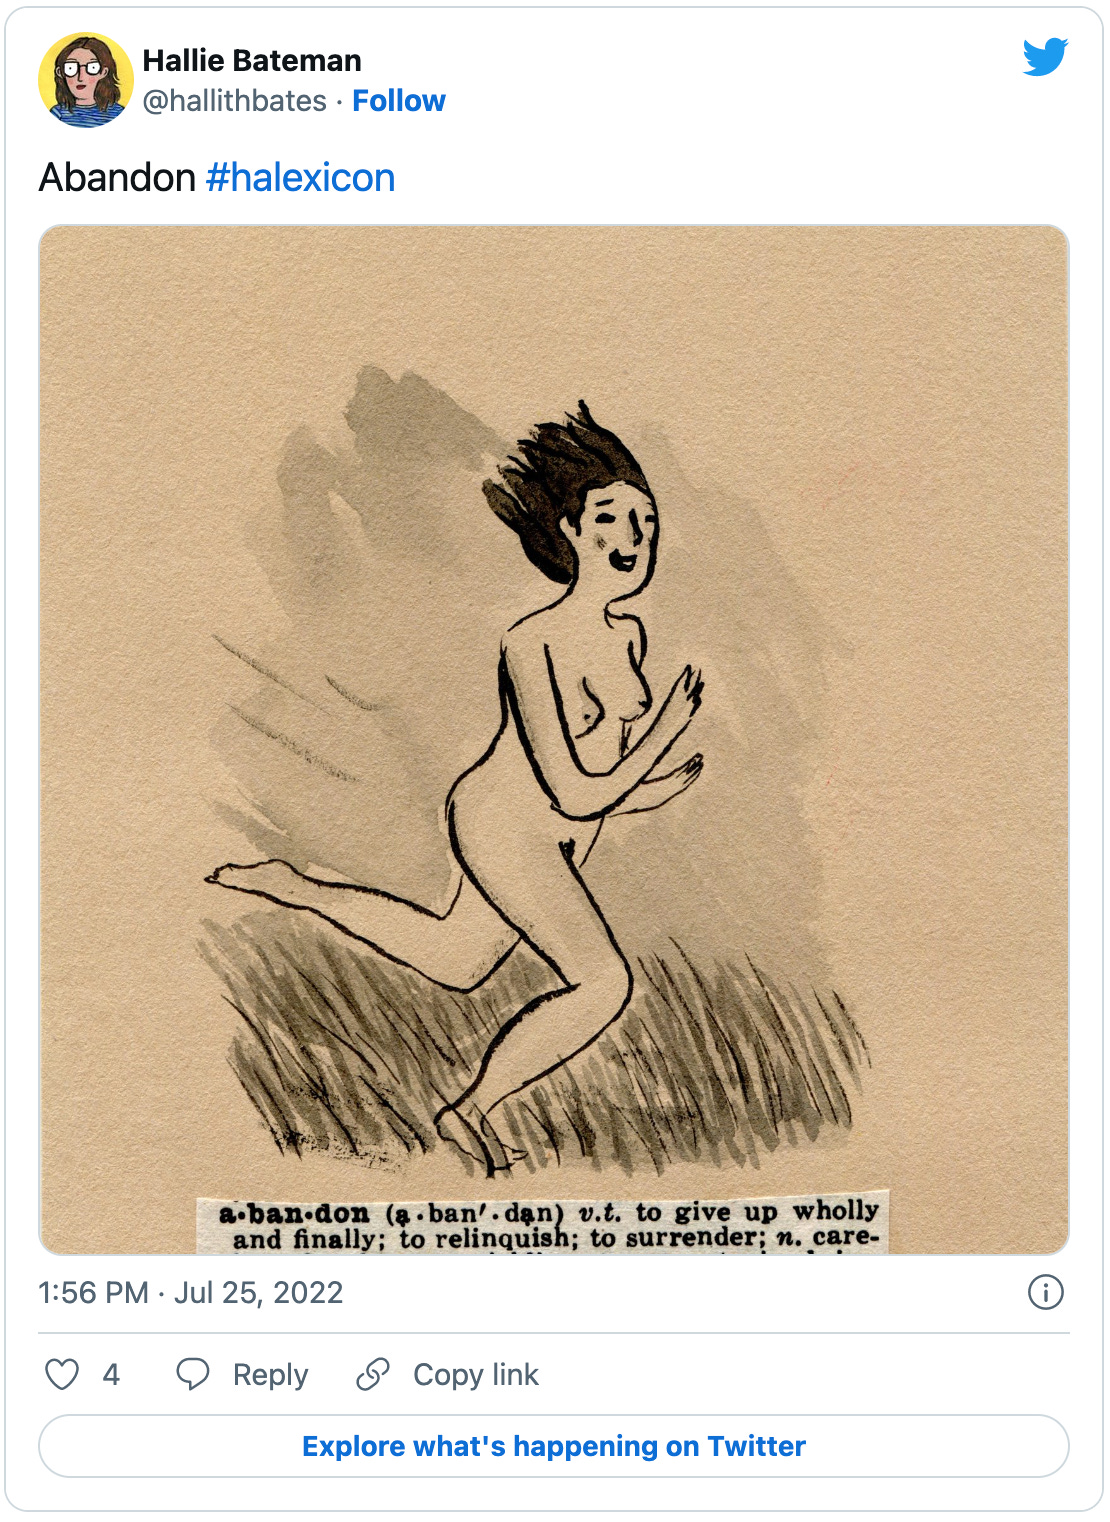 A tweet from Hallie Bateman that says “Abandon #halexicon” and includes an adorable pen illustration of a woman gleefully running nude through the grass, with a dictionary clipping defining the word “abandon” as: “a ban.don (a.ban'. dan) v.t. to give up wholly and finally; to relinquish; to surrender; n. careless freedom; a yielding to unrestrained impulse; dash. -ed a. deserted; forsaken; unrestrained; given up entirely to, esp. wickedness. -edly adv. -ment n. the act of abandoning, or state of being abandoned; (Law) the relinquishing of an interest or claim [0.Fr. aban doner].”